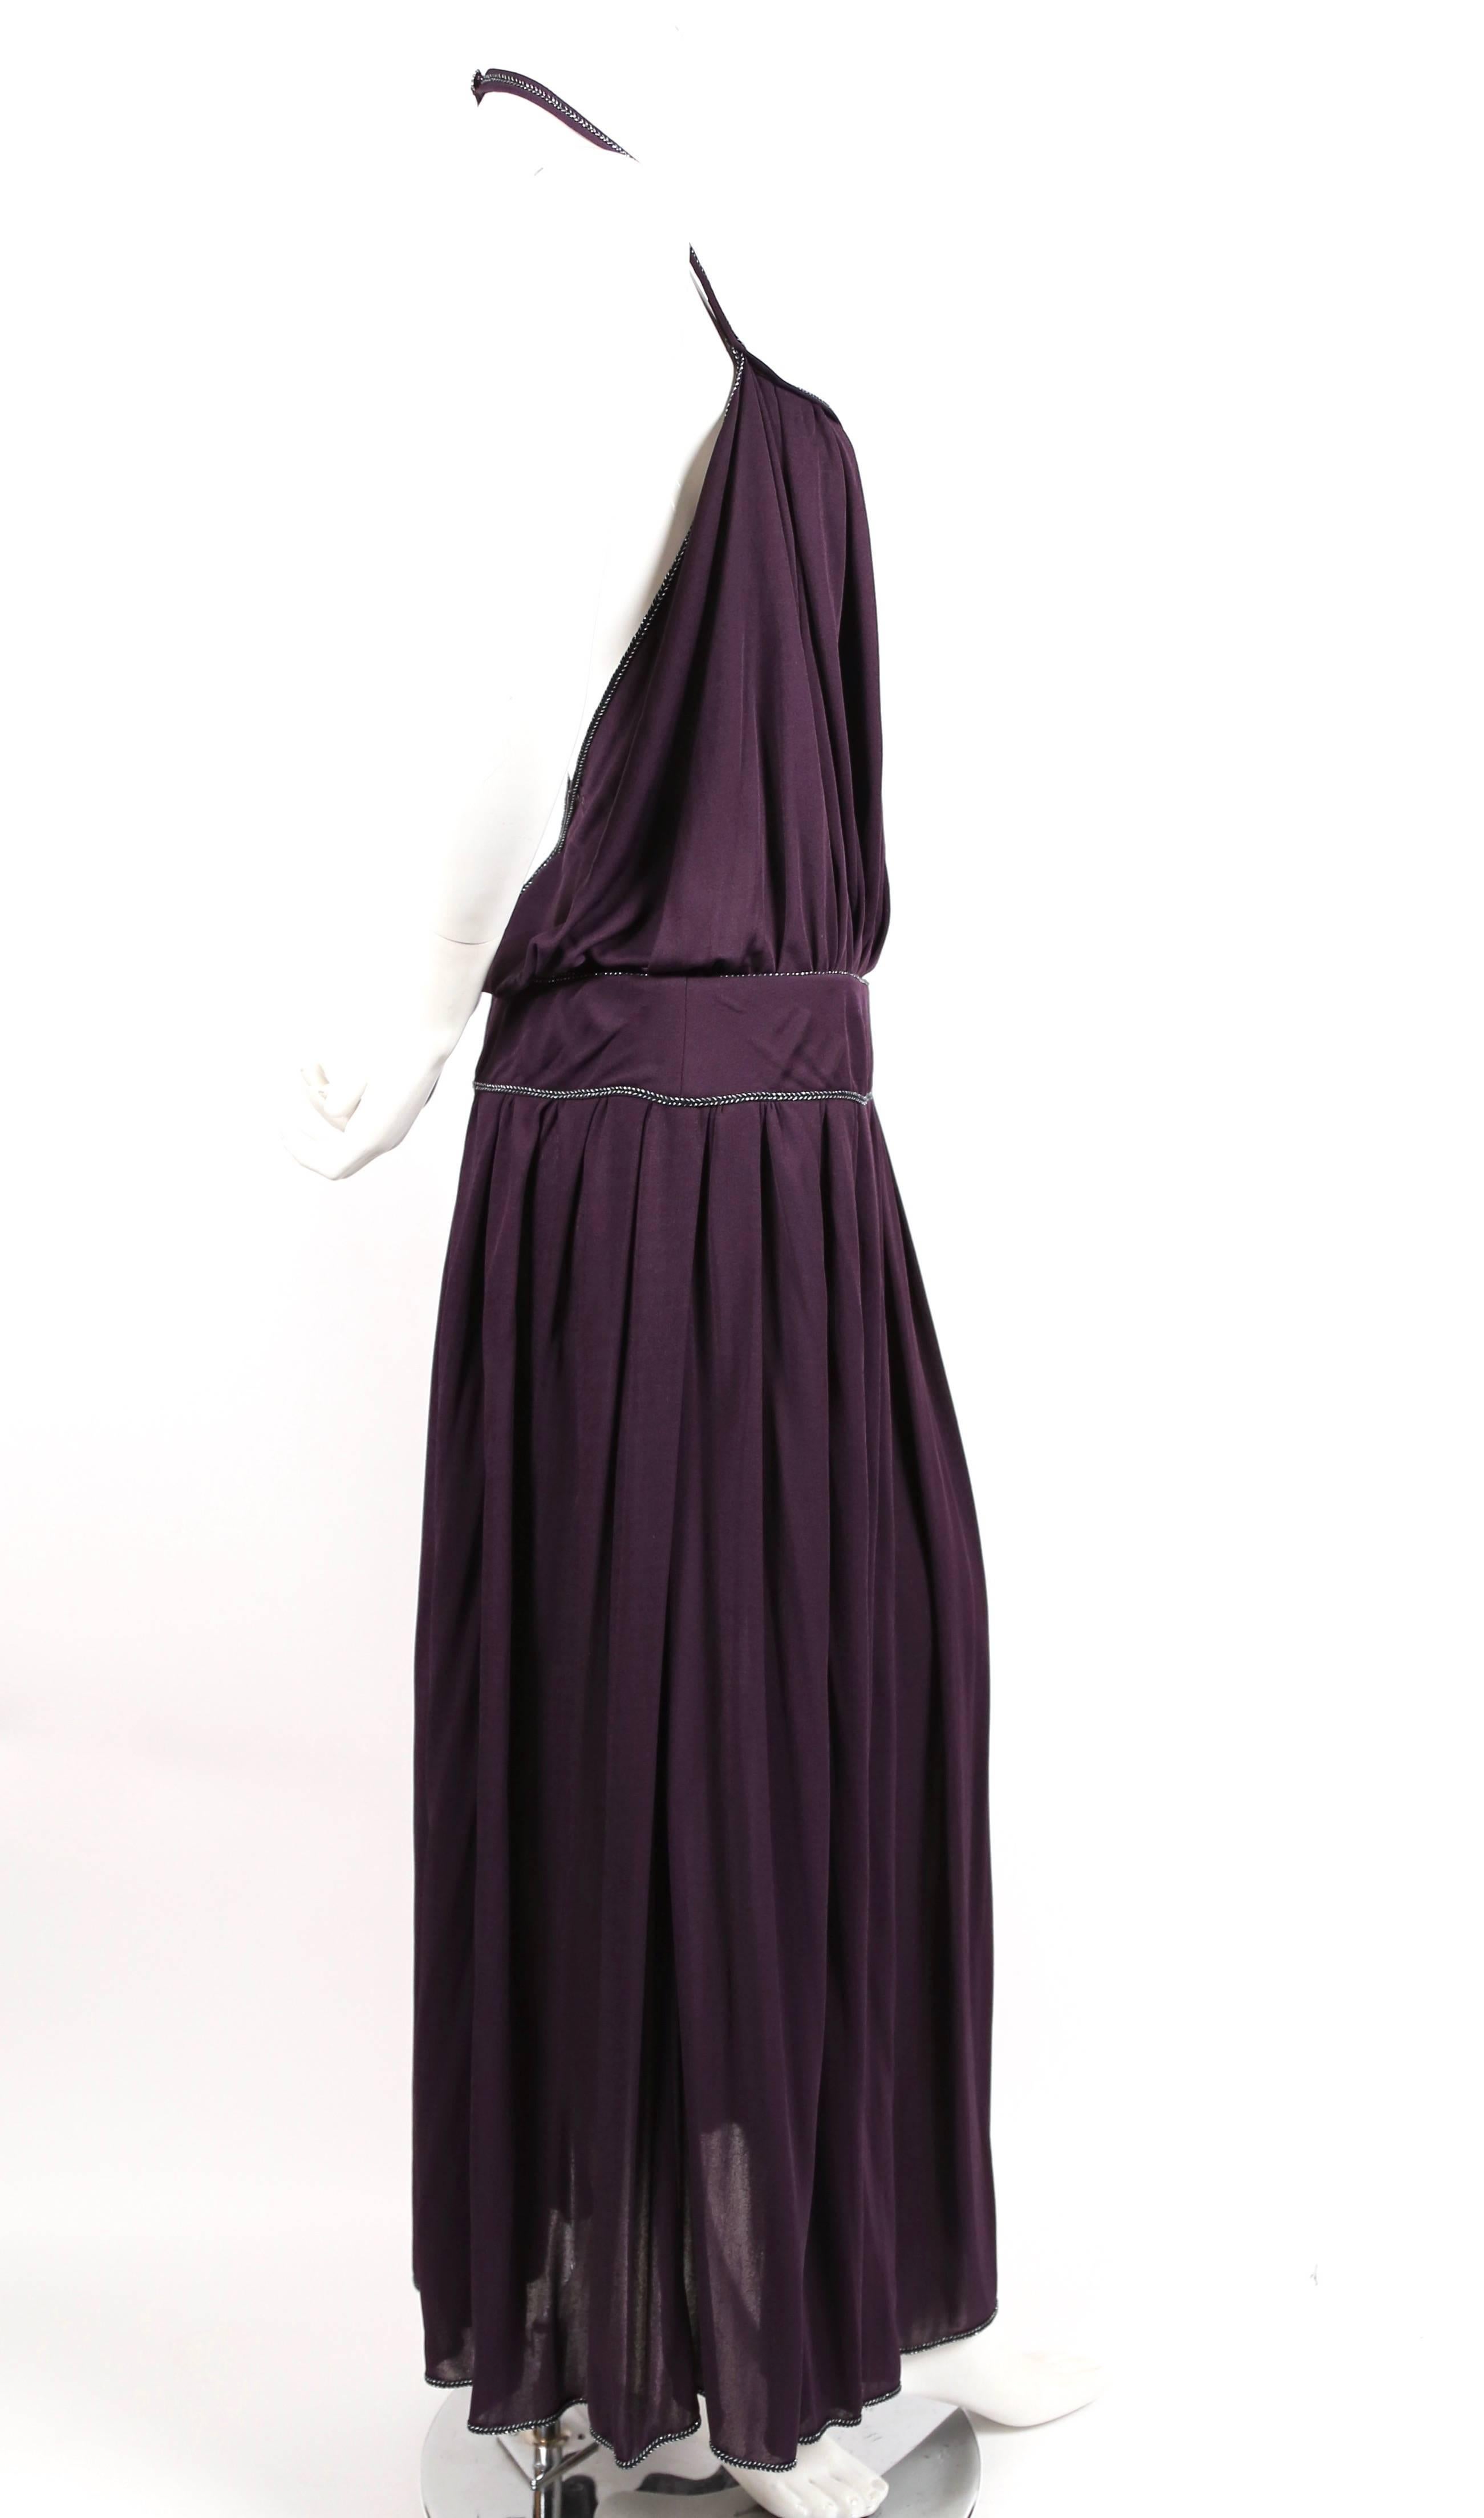 Purple viscose jersey gown with metallic silver toned trim and extra high thigh slit from Bill Gibb dating to the 1970's. Blouson bodice. Halter neckline with decorative button at back of neck. Dress is labeled a UK 12 (US 8) however its fits a US